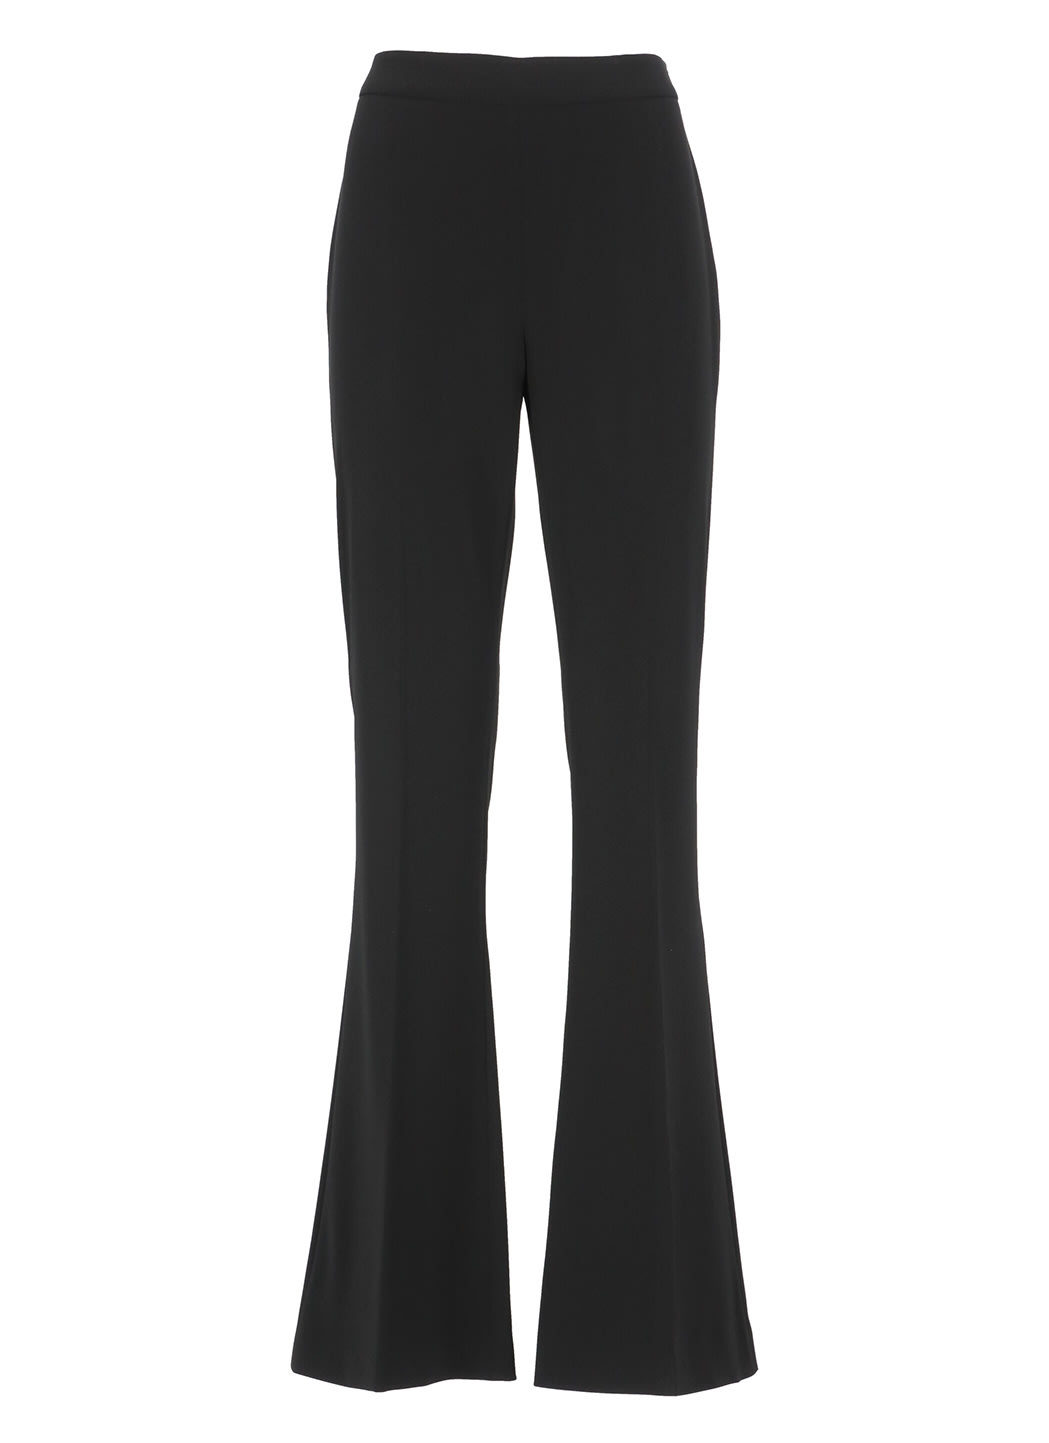 Boutique Moschino Fabric Trousers